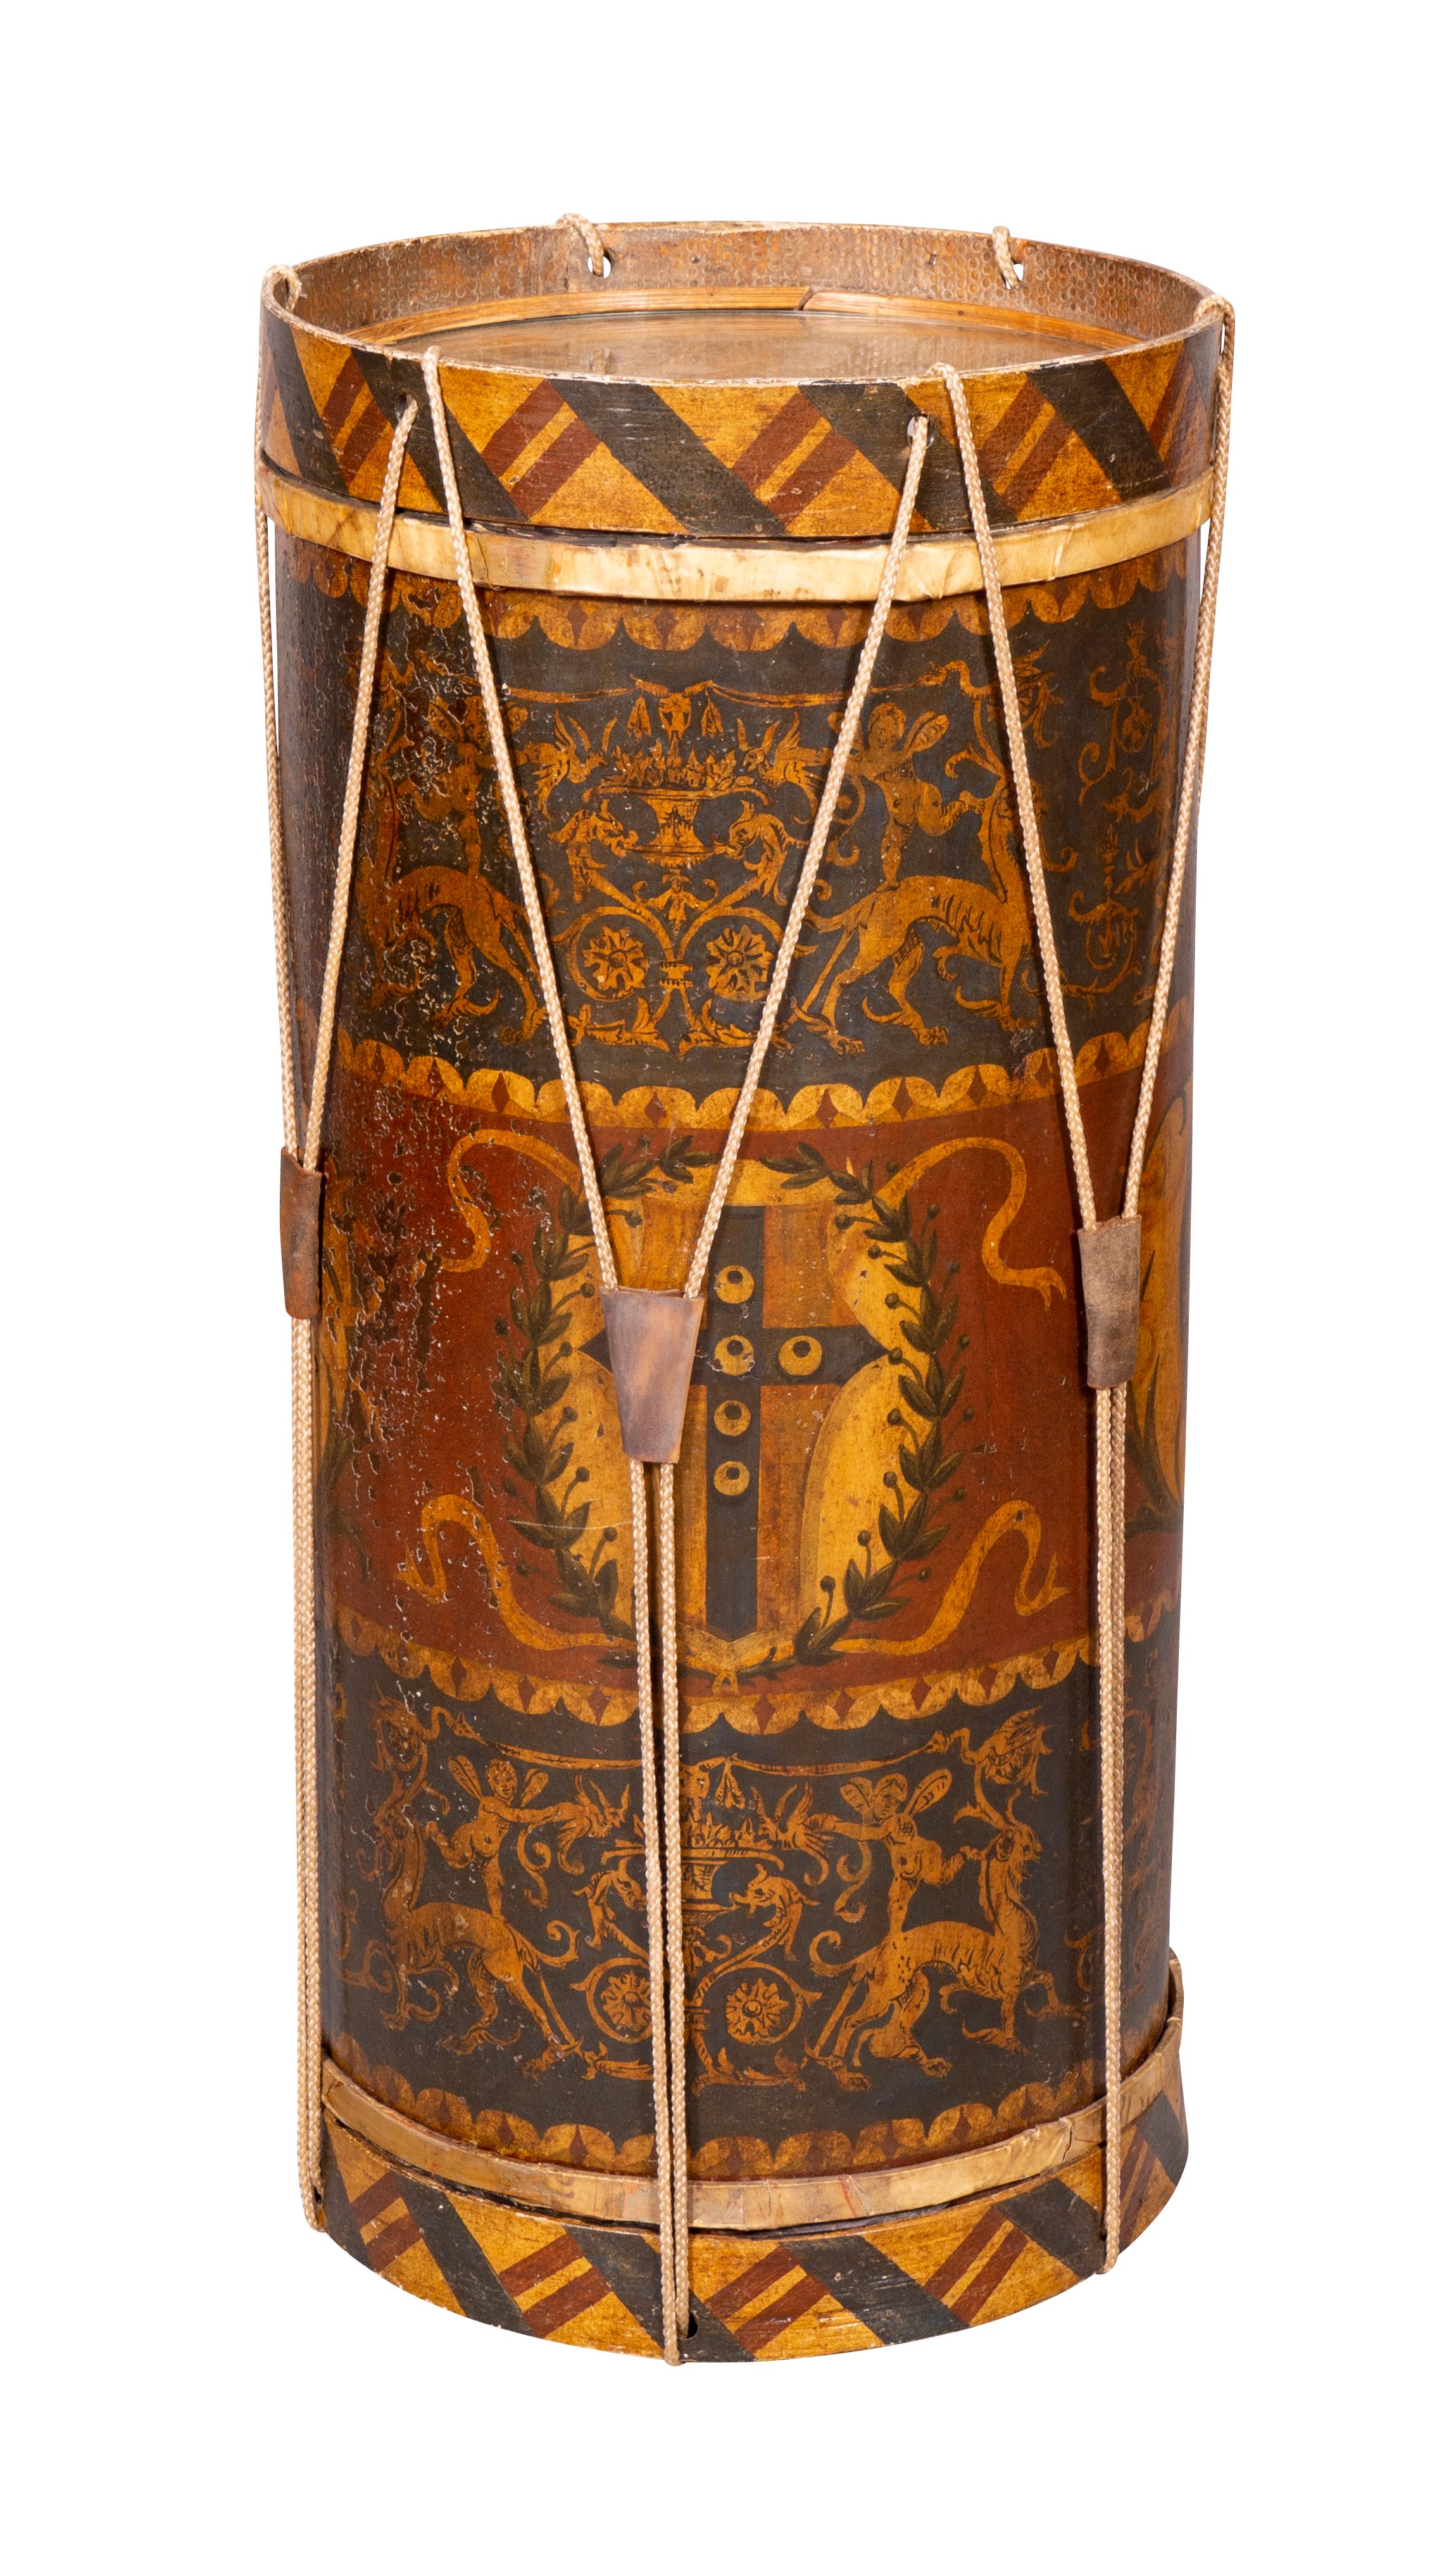 An interesting piece of cylindrical form with vellum tops, the sides decorated with shields and classical design. Strung with rope tied to wood rings at each end.